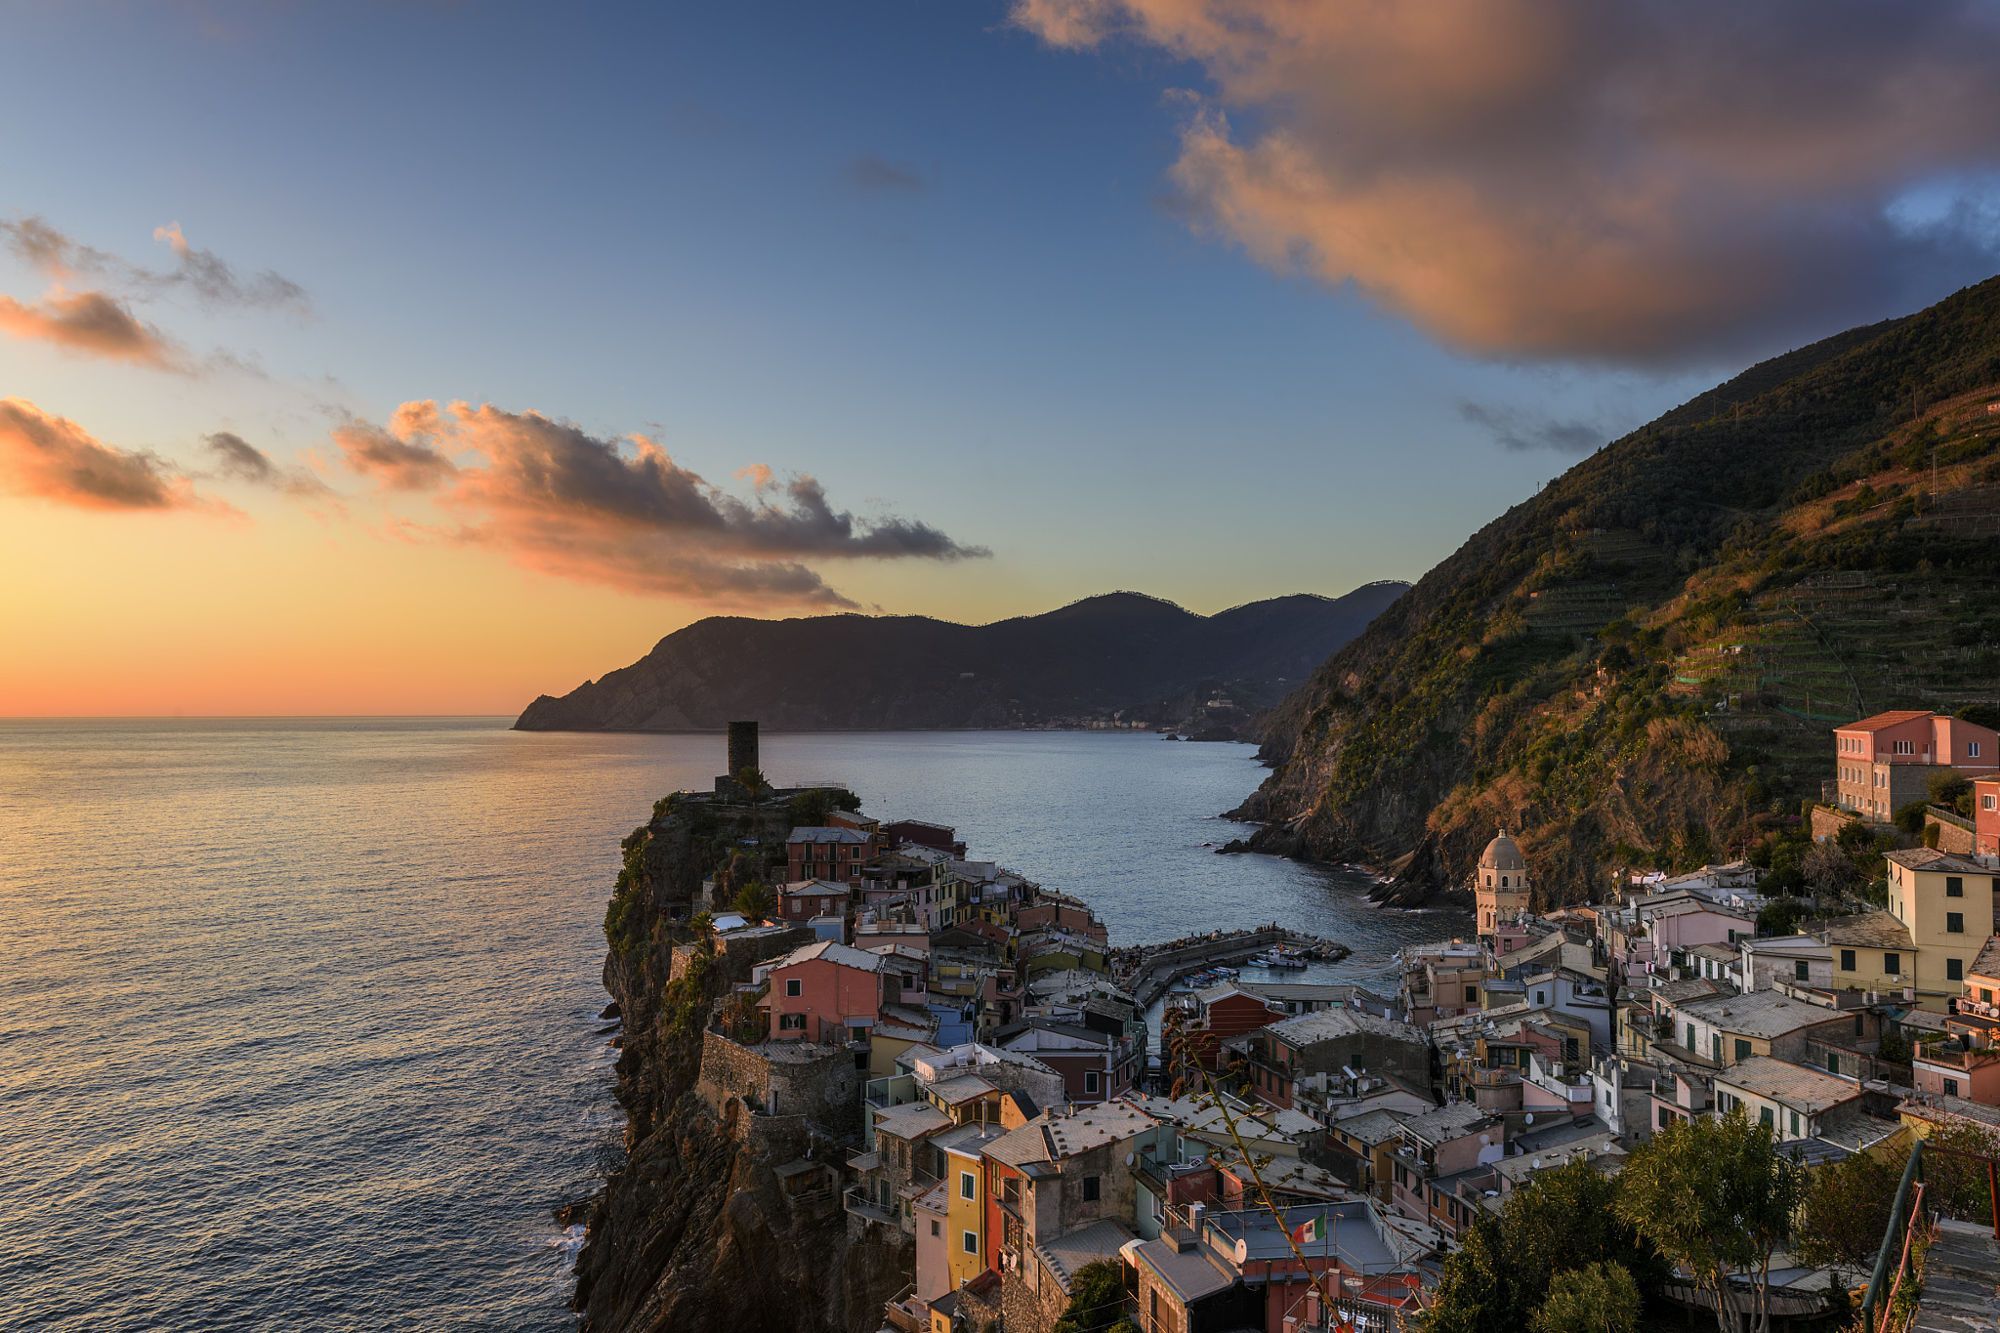 Lee GND 6 softgrad for the sky. Vernazza, Cinque terre